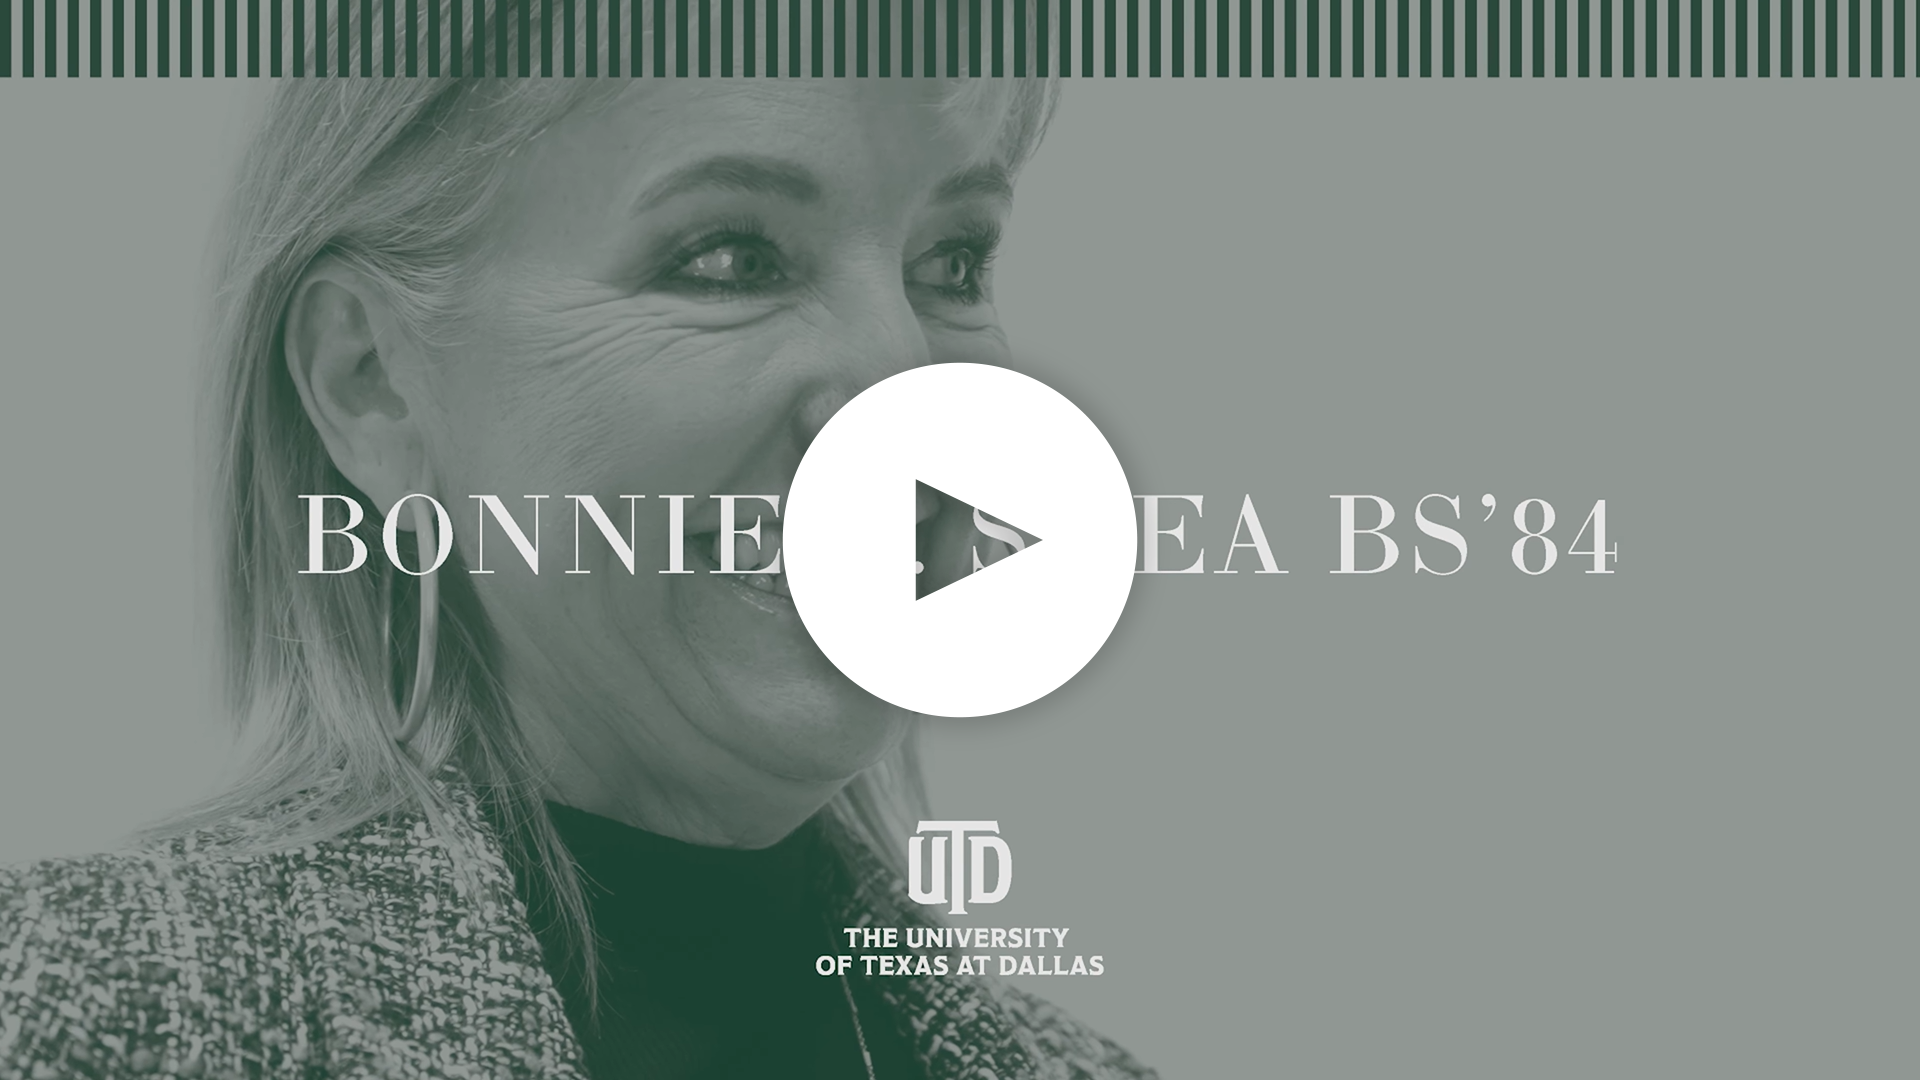 Watch Bonnie Shea's interview on YouTube